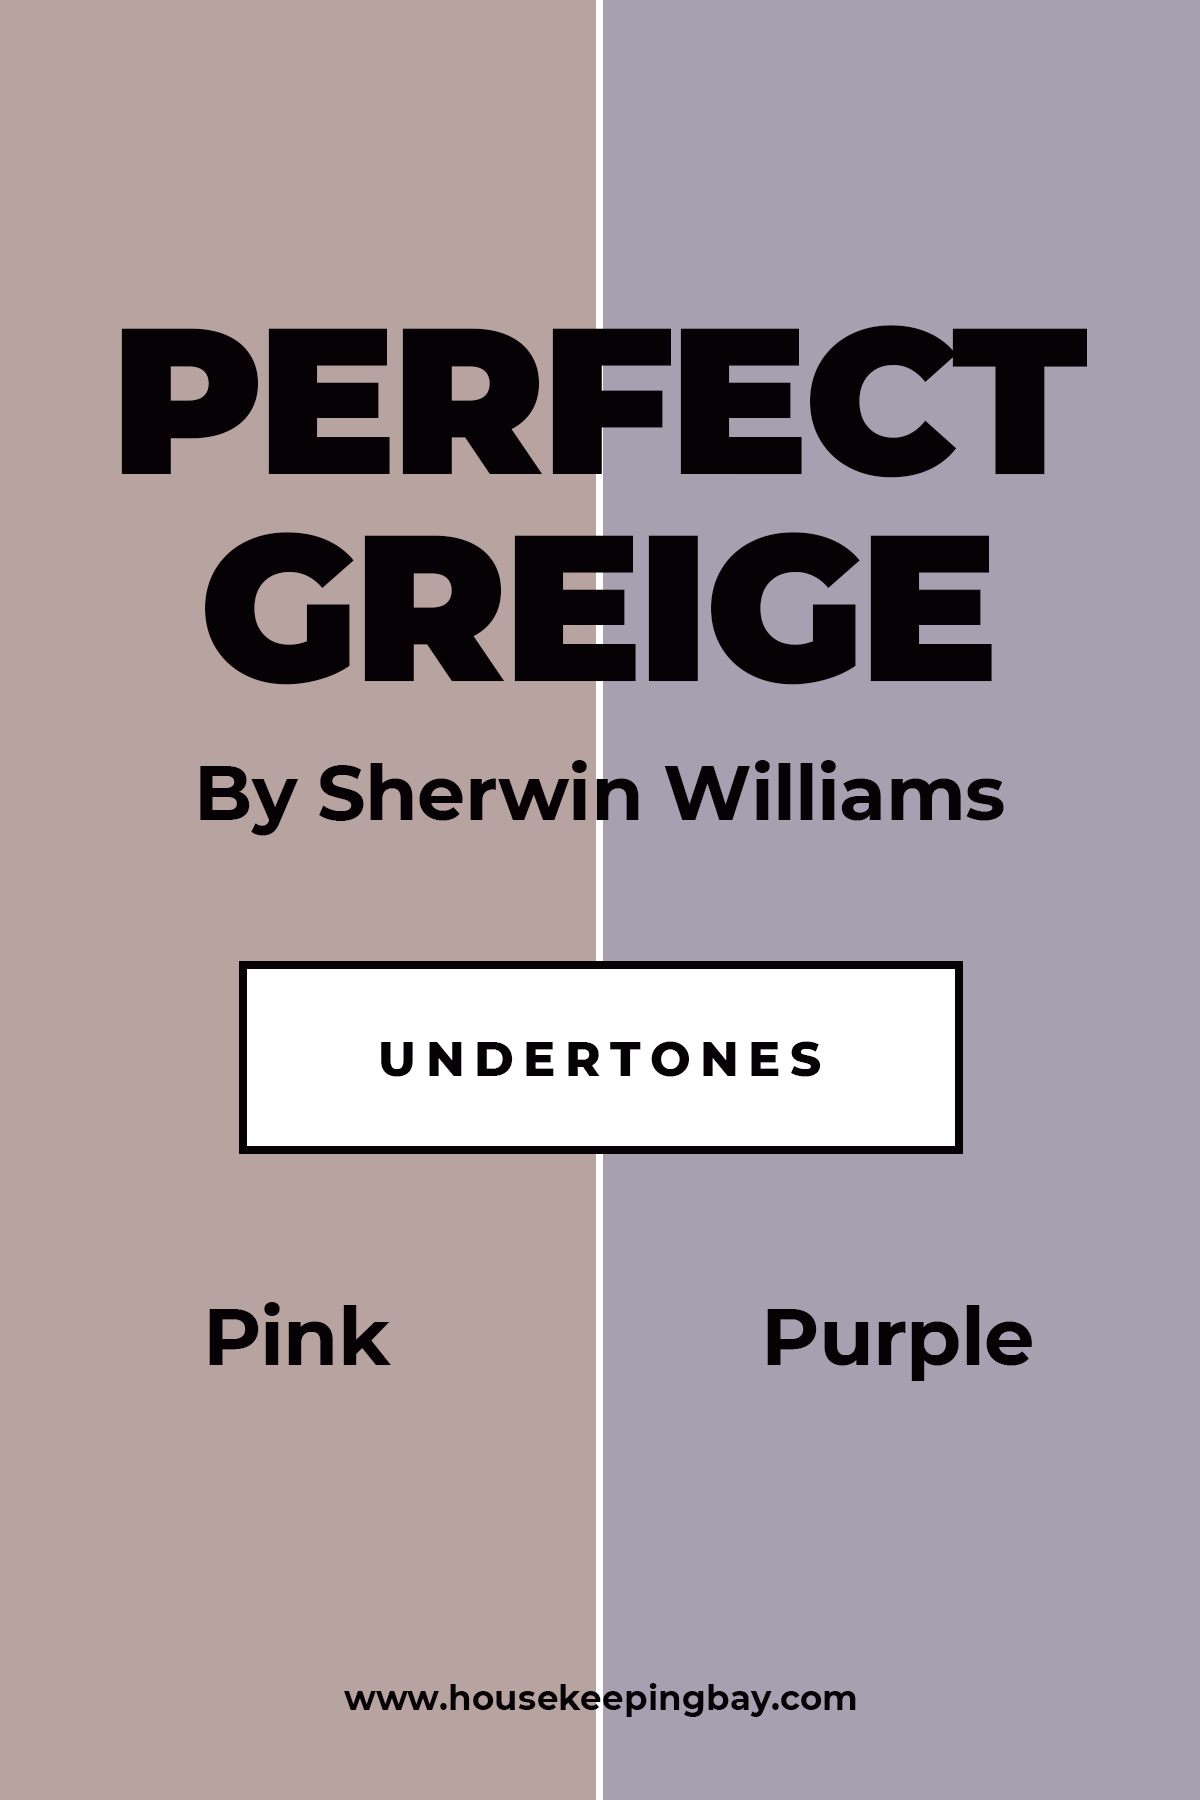 Undertones Perfect Greige By Sherwin Williams